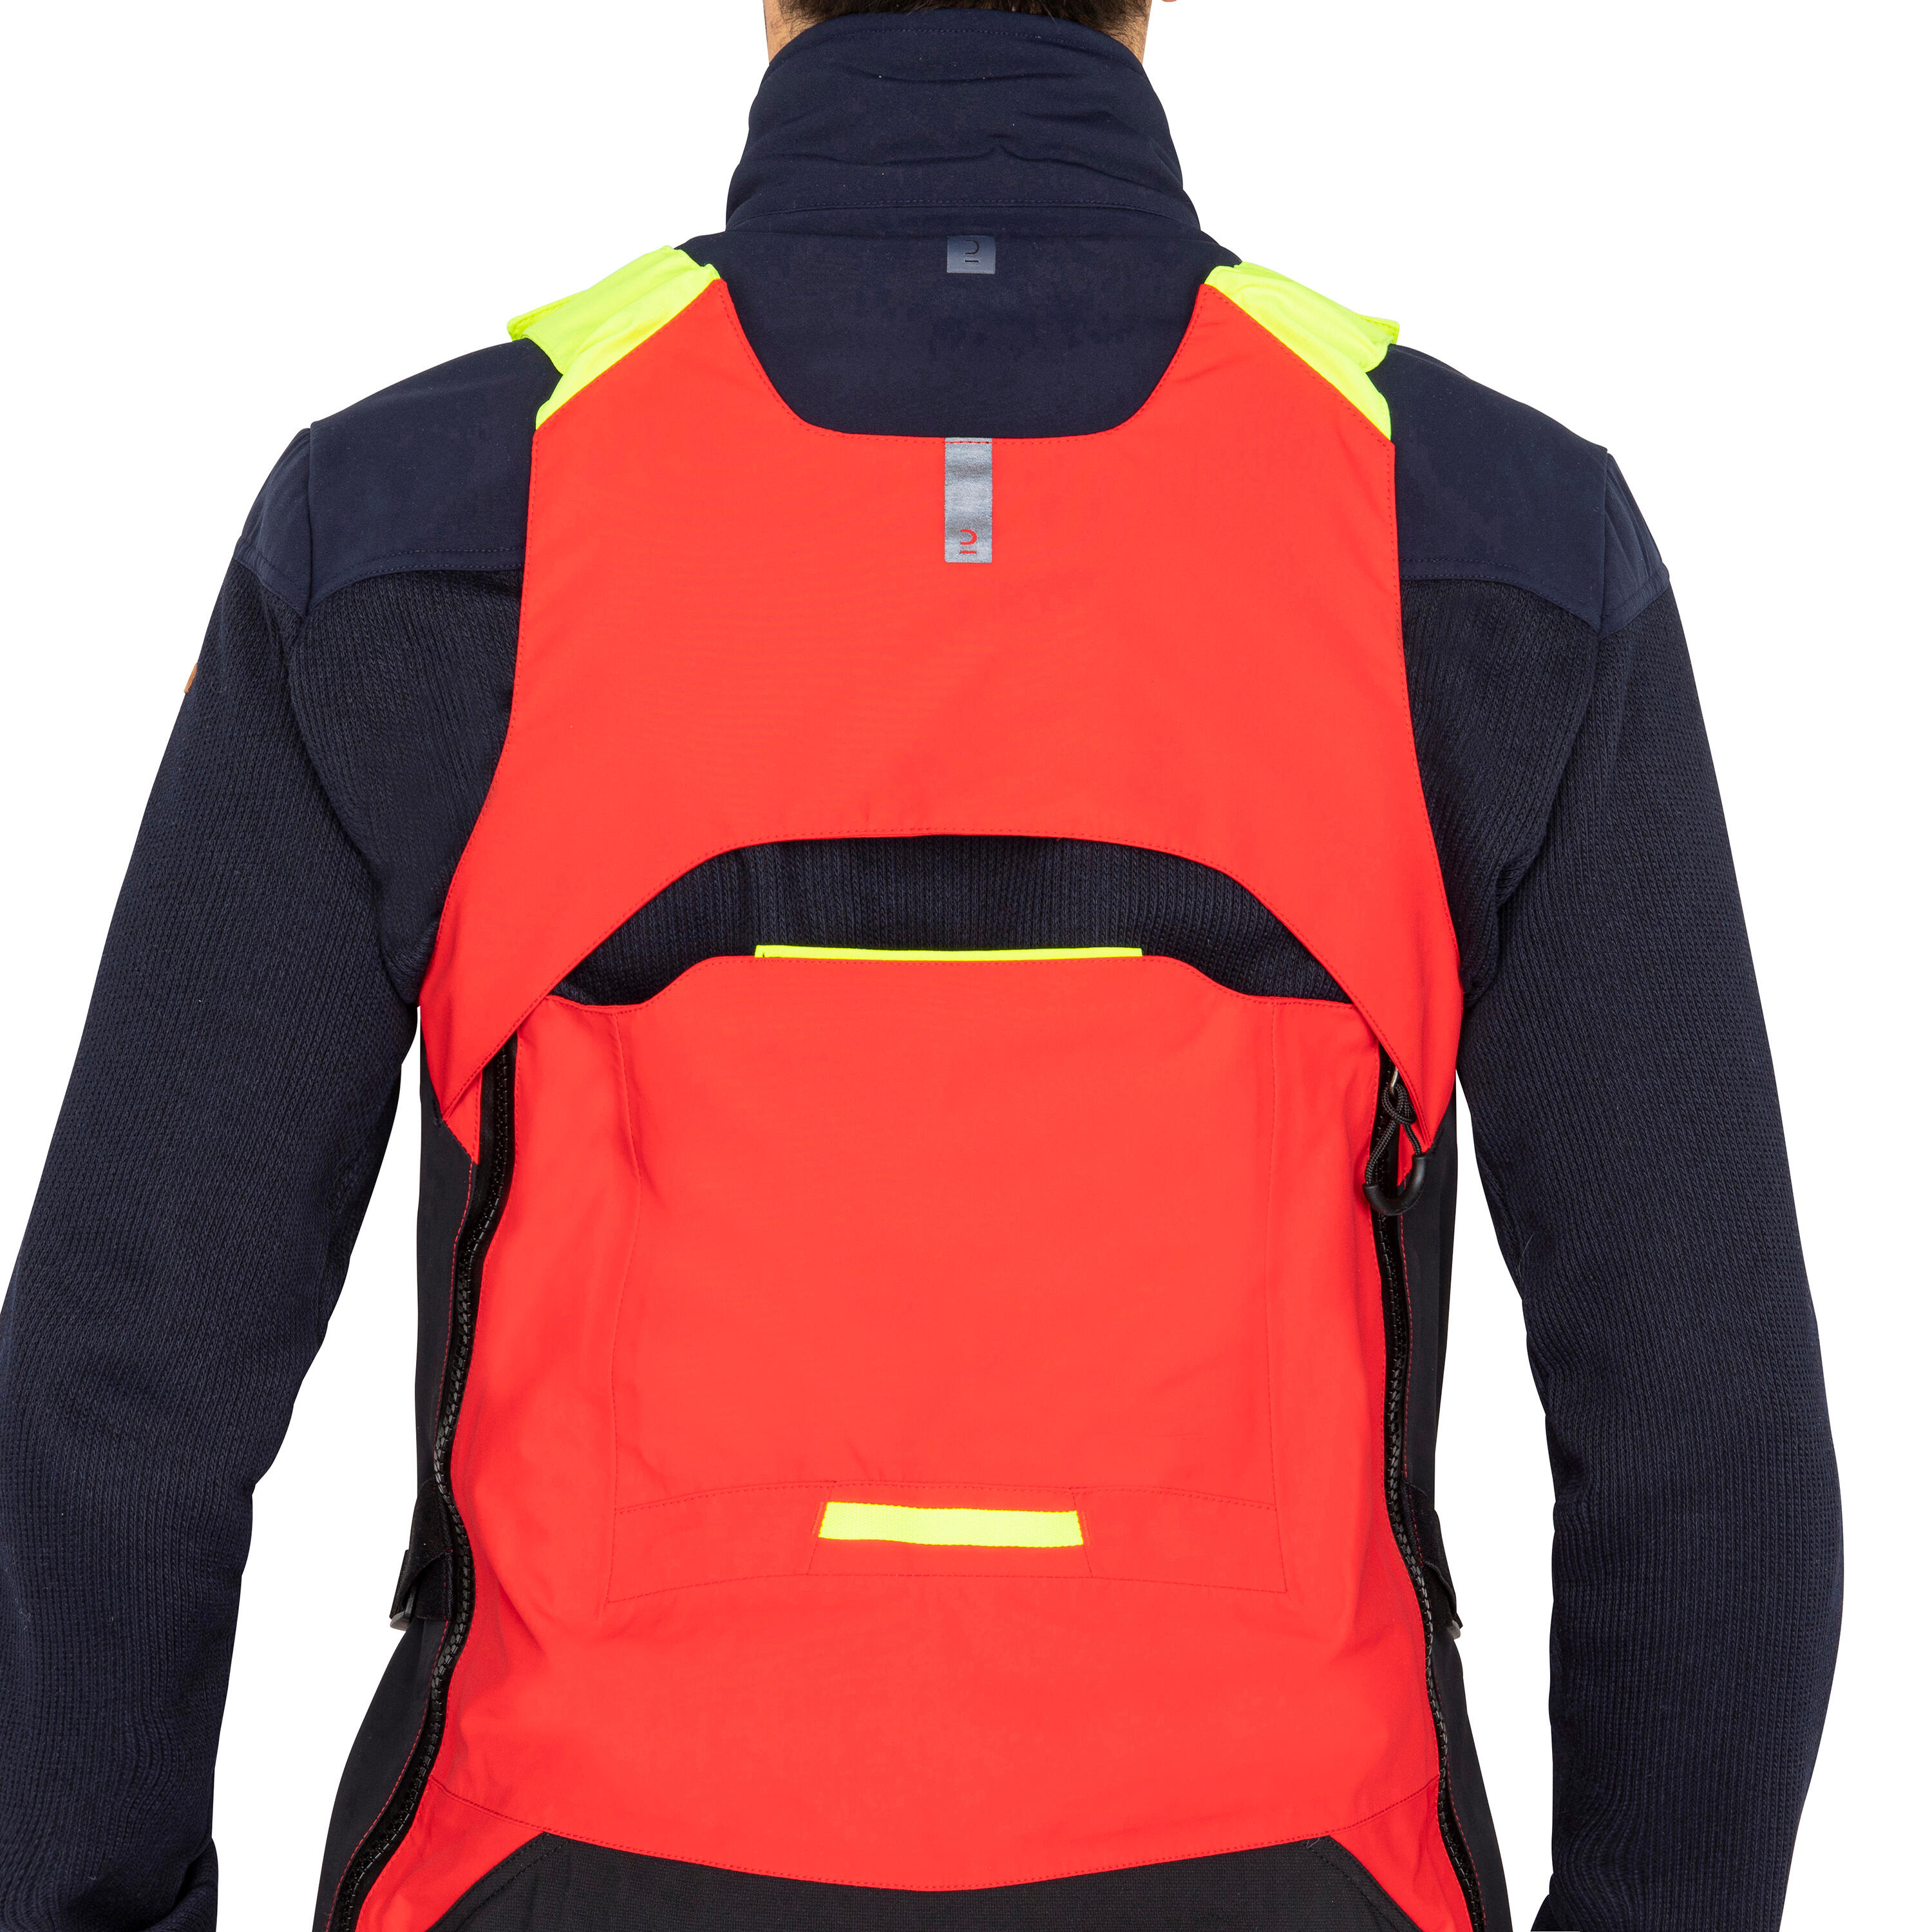 Adult Sailing overalls - Offshore 900 OPEN dropseat red 7/16